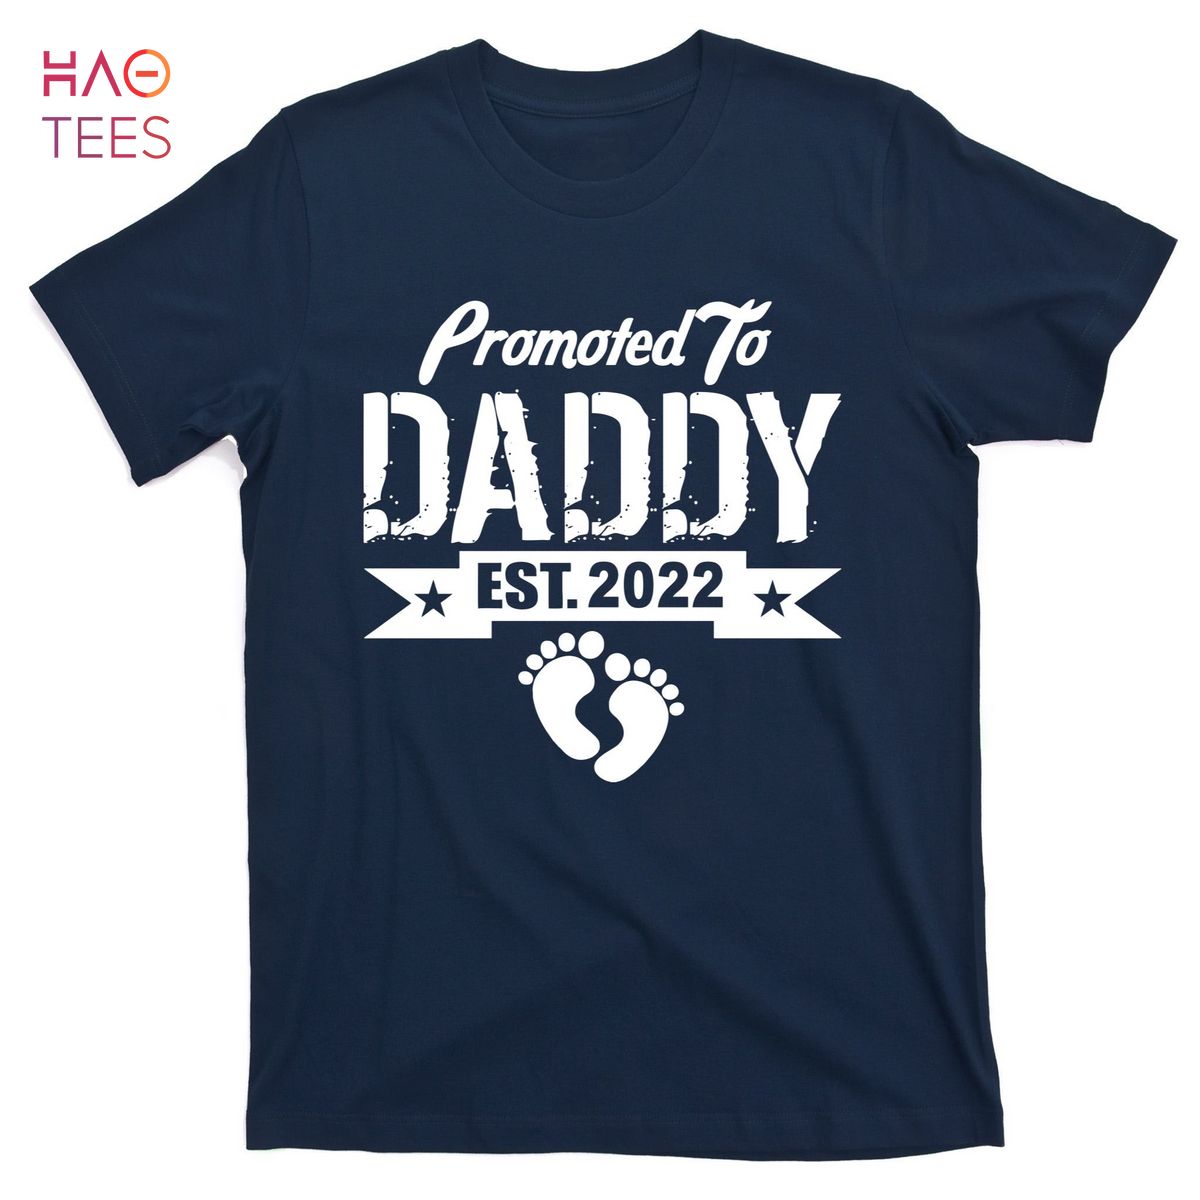 HOT Promoted To Daddy Est. 2022 T-Shirts